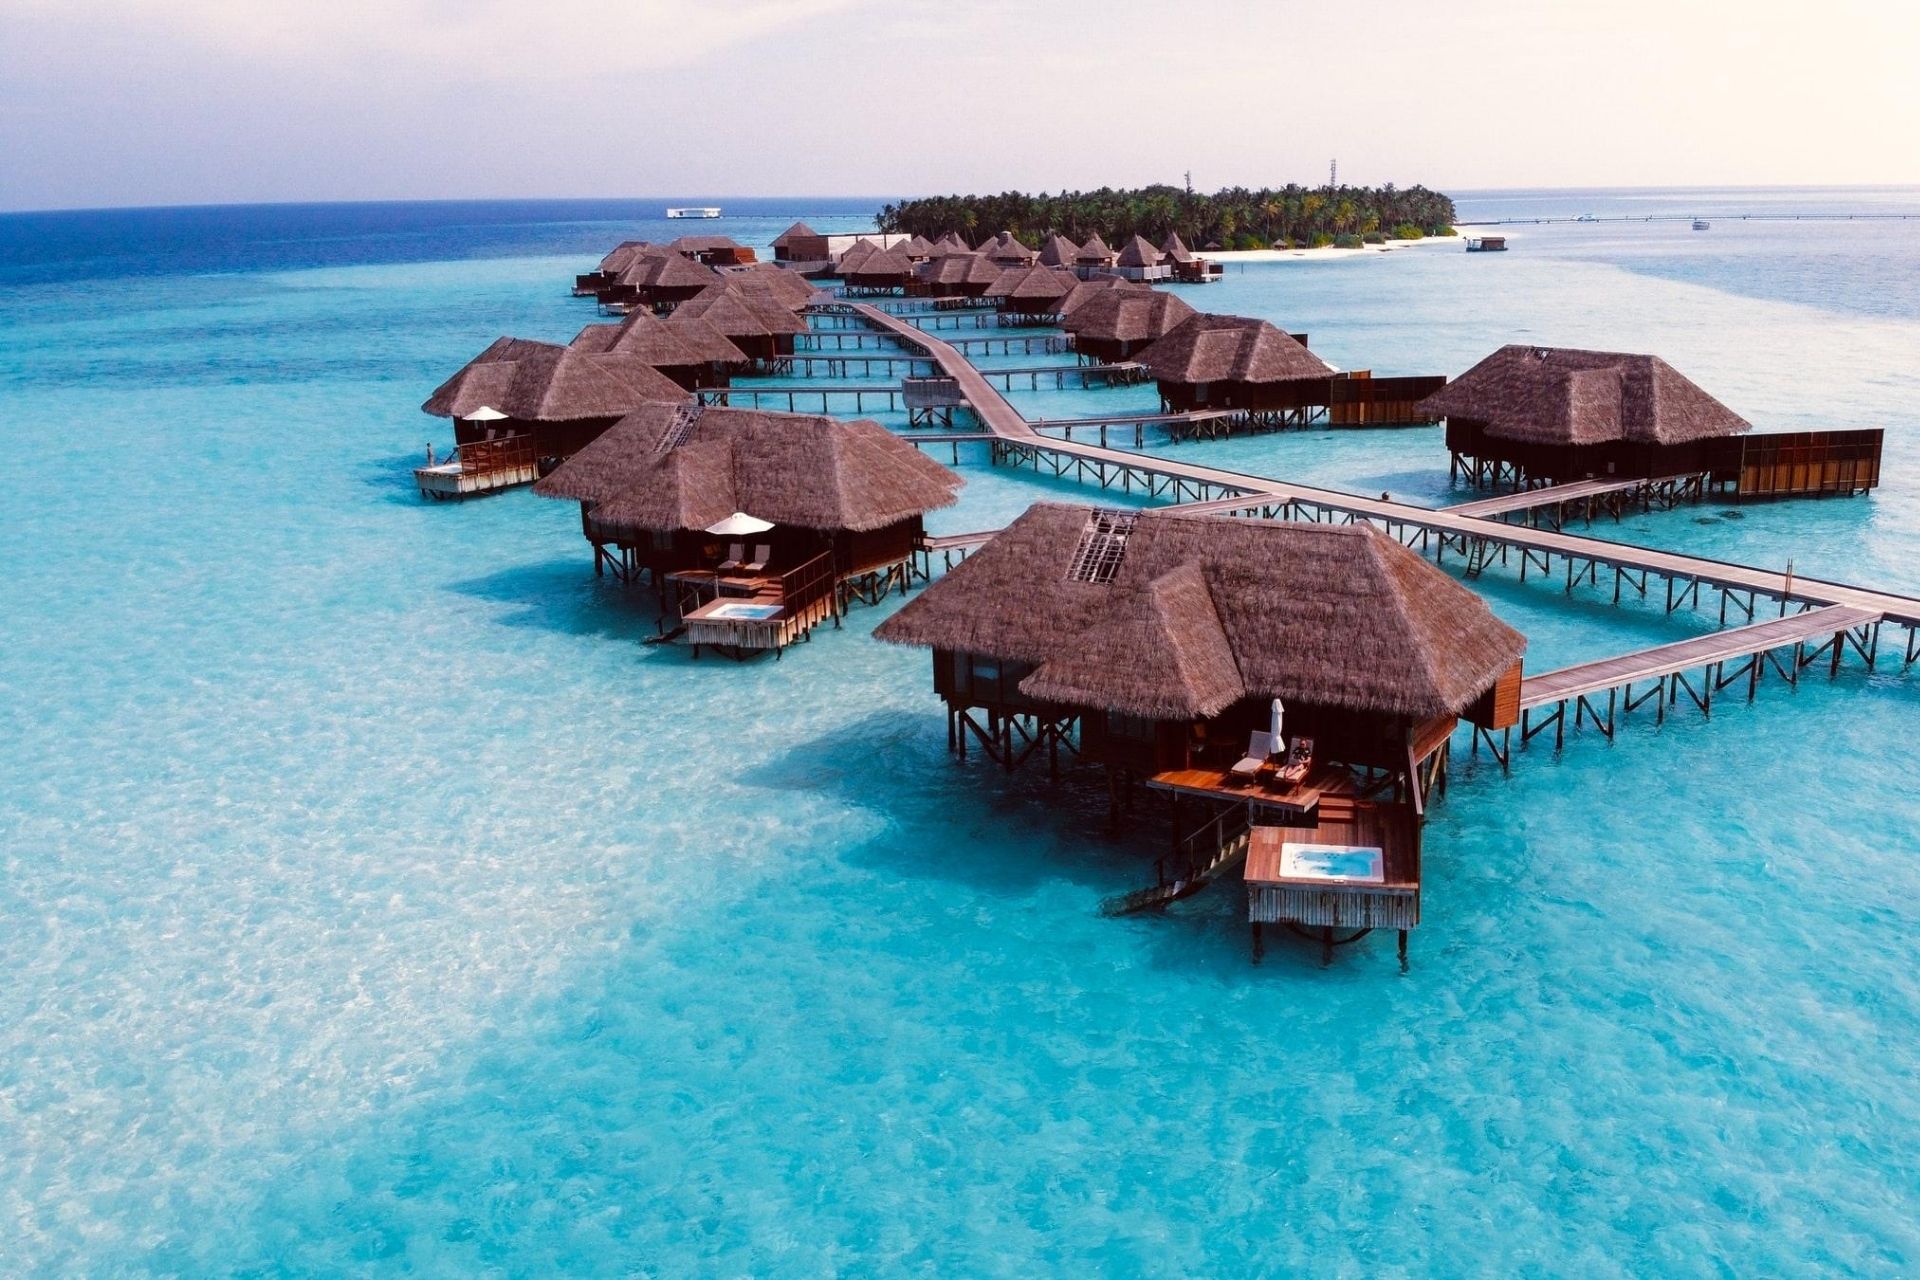 Maldives Tour Packages from India - Maldives Trip Cost in Indian Rupees